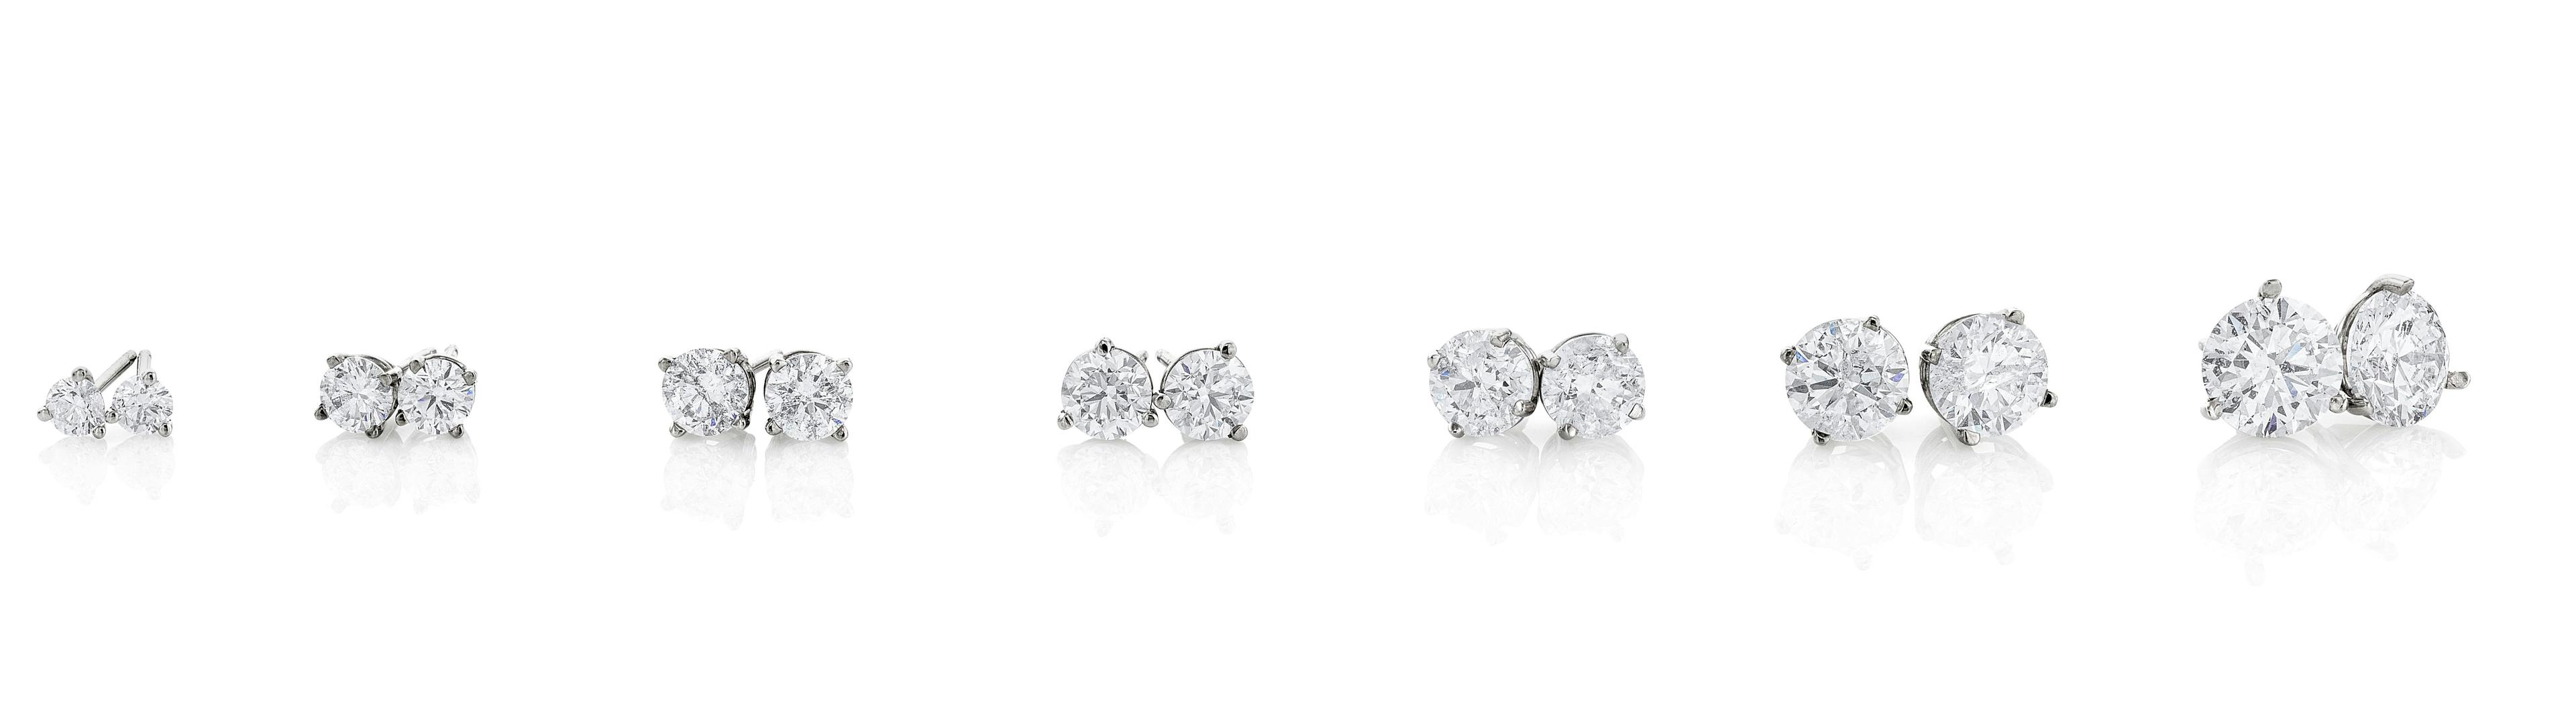 round diamond stud earrings available at Lee Michaels Fine Jewelry stores